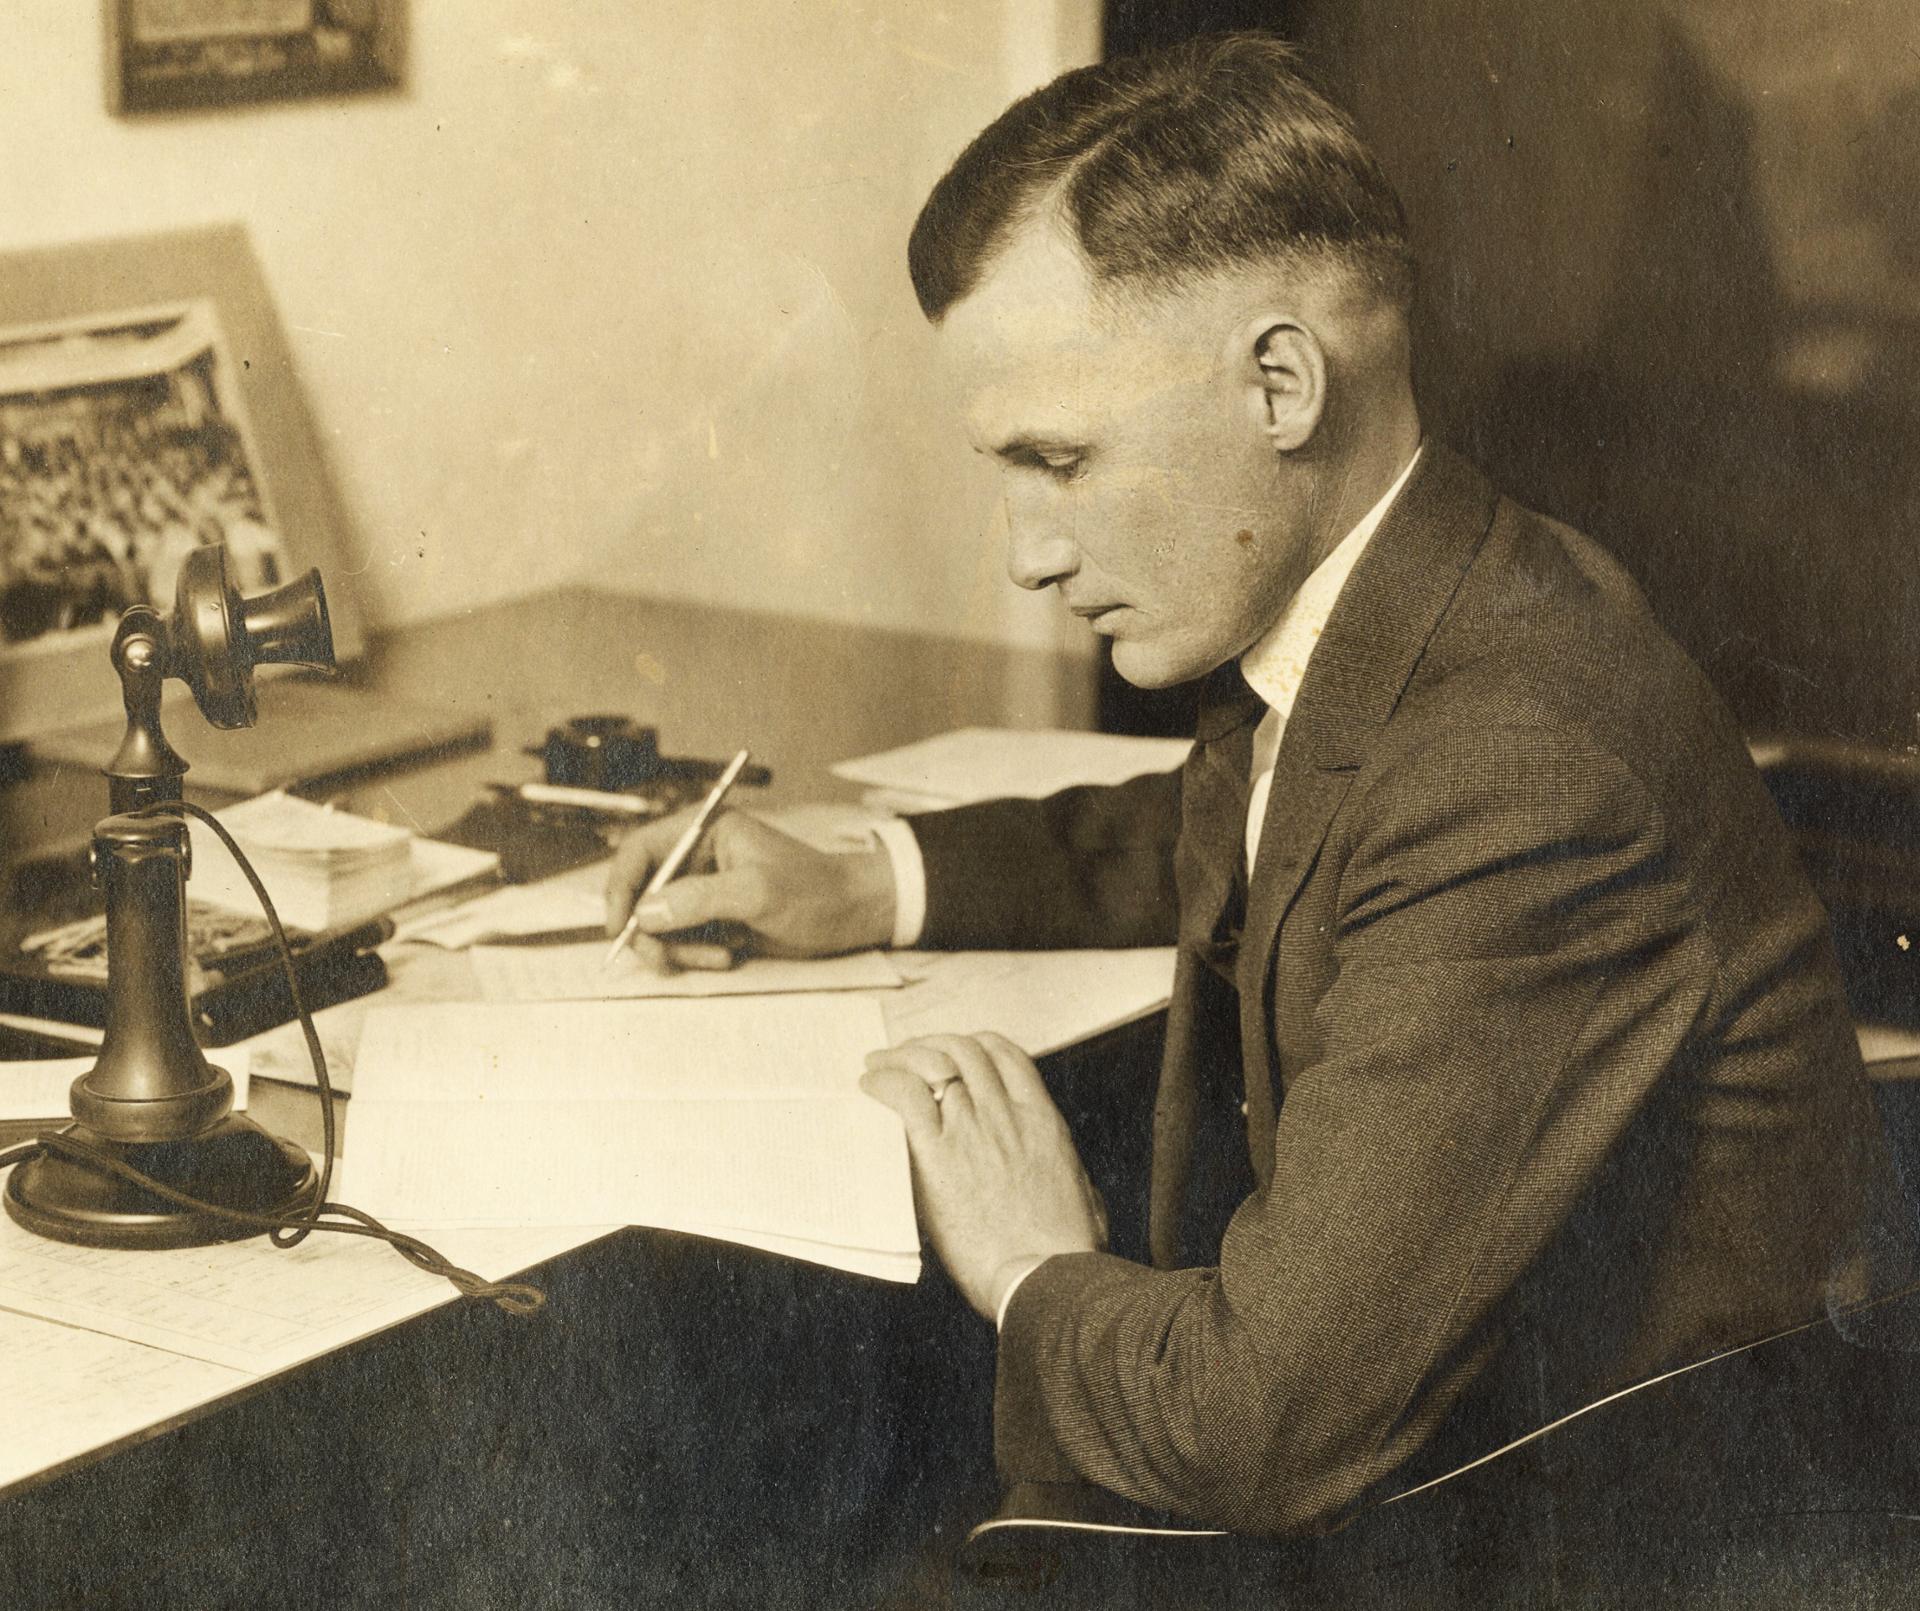 Antique photograph of a man writing intently at a desk